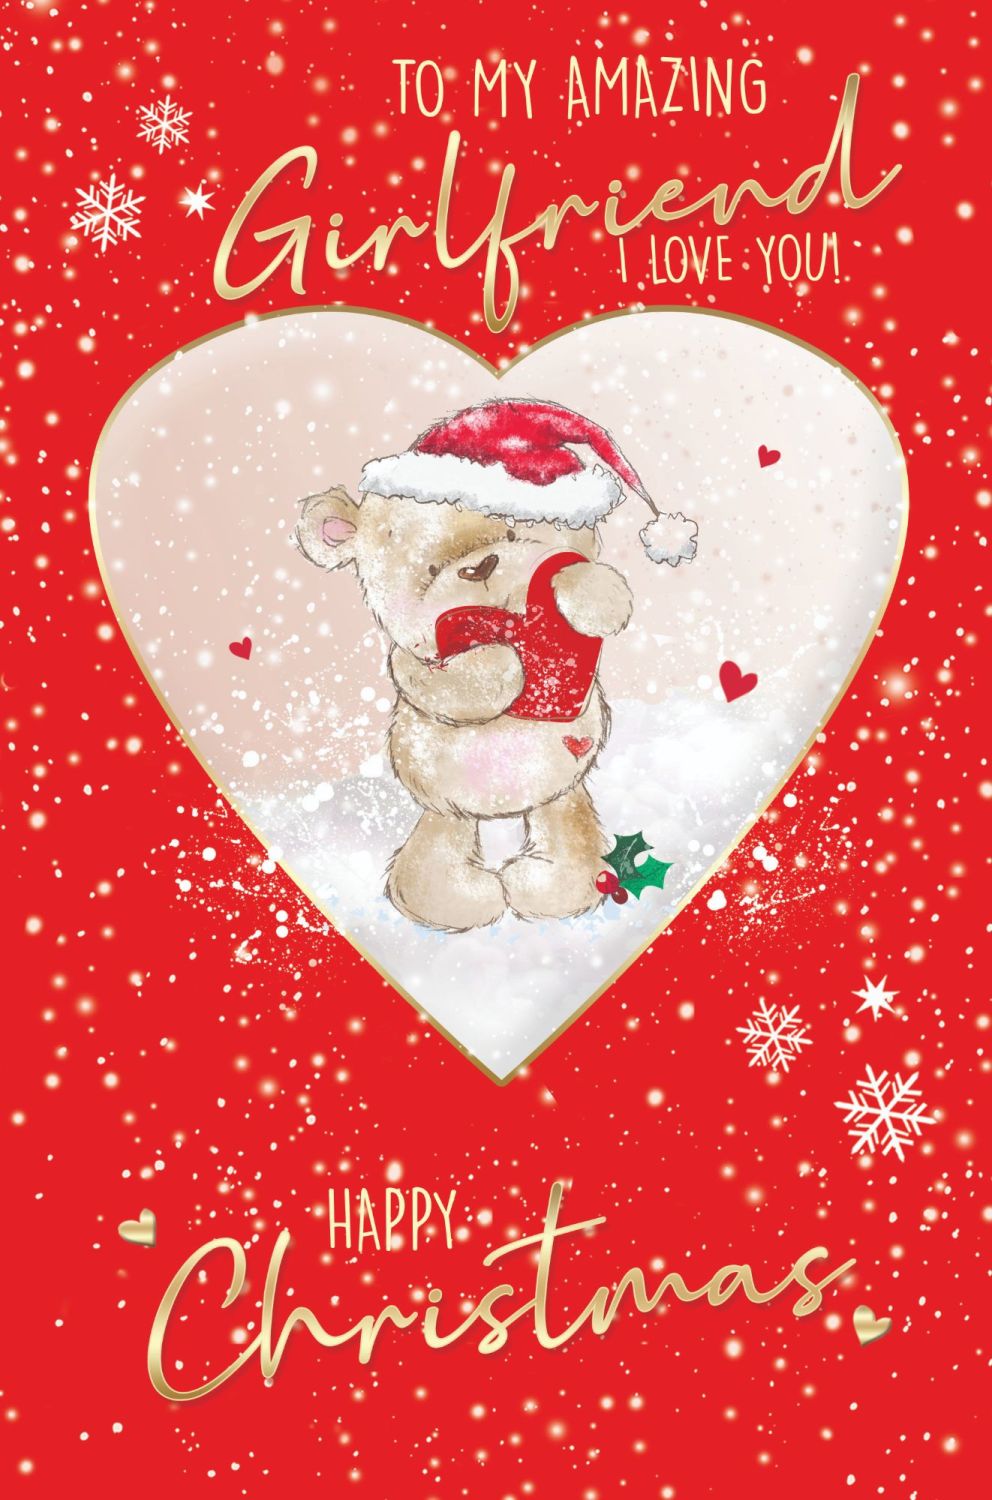 Romantic Christmas Card For Girlfriend - LOVE YOU - Beautiful XMAS Card FOR